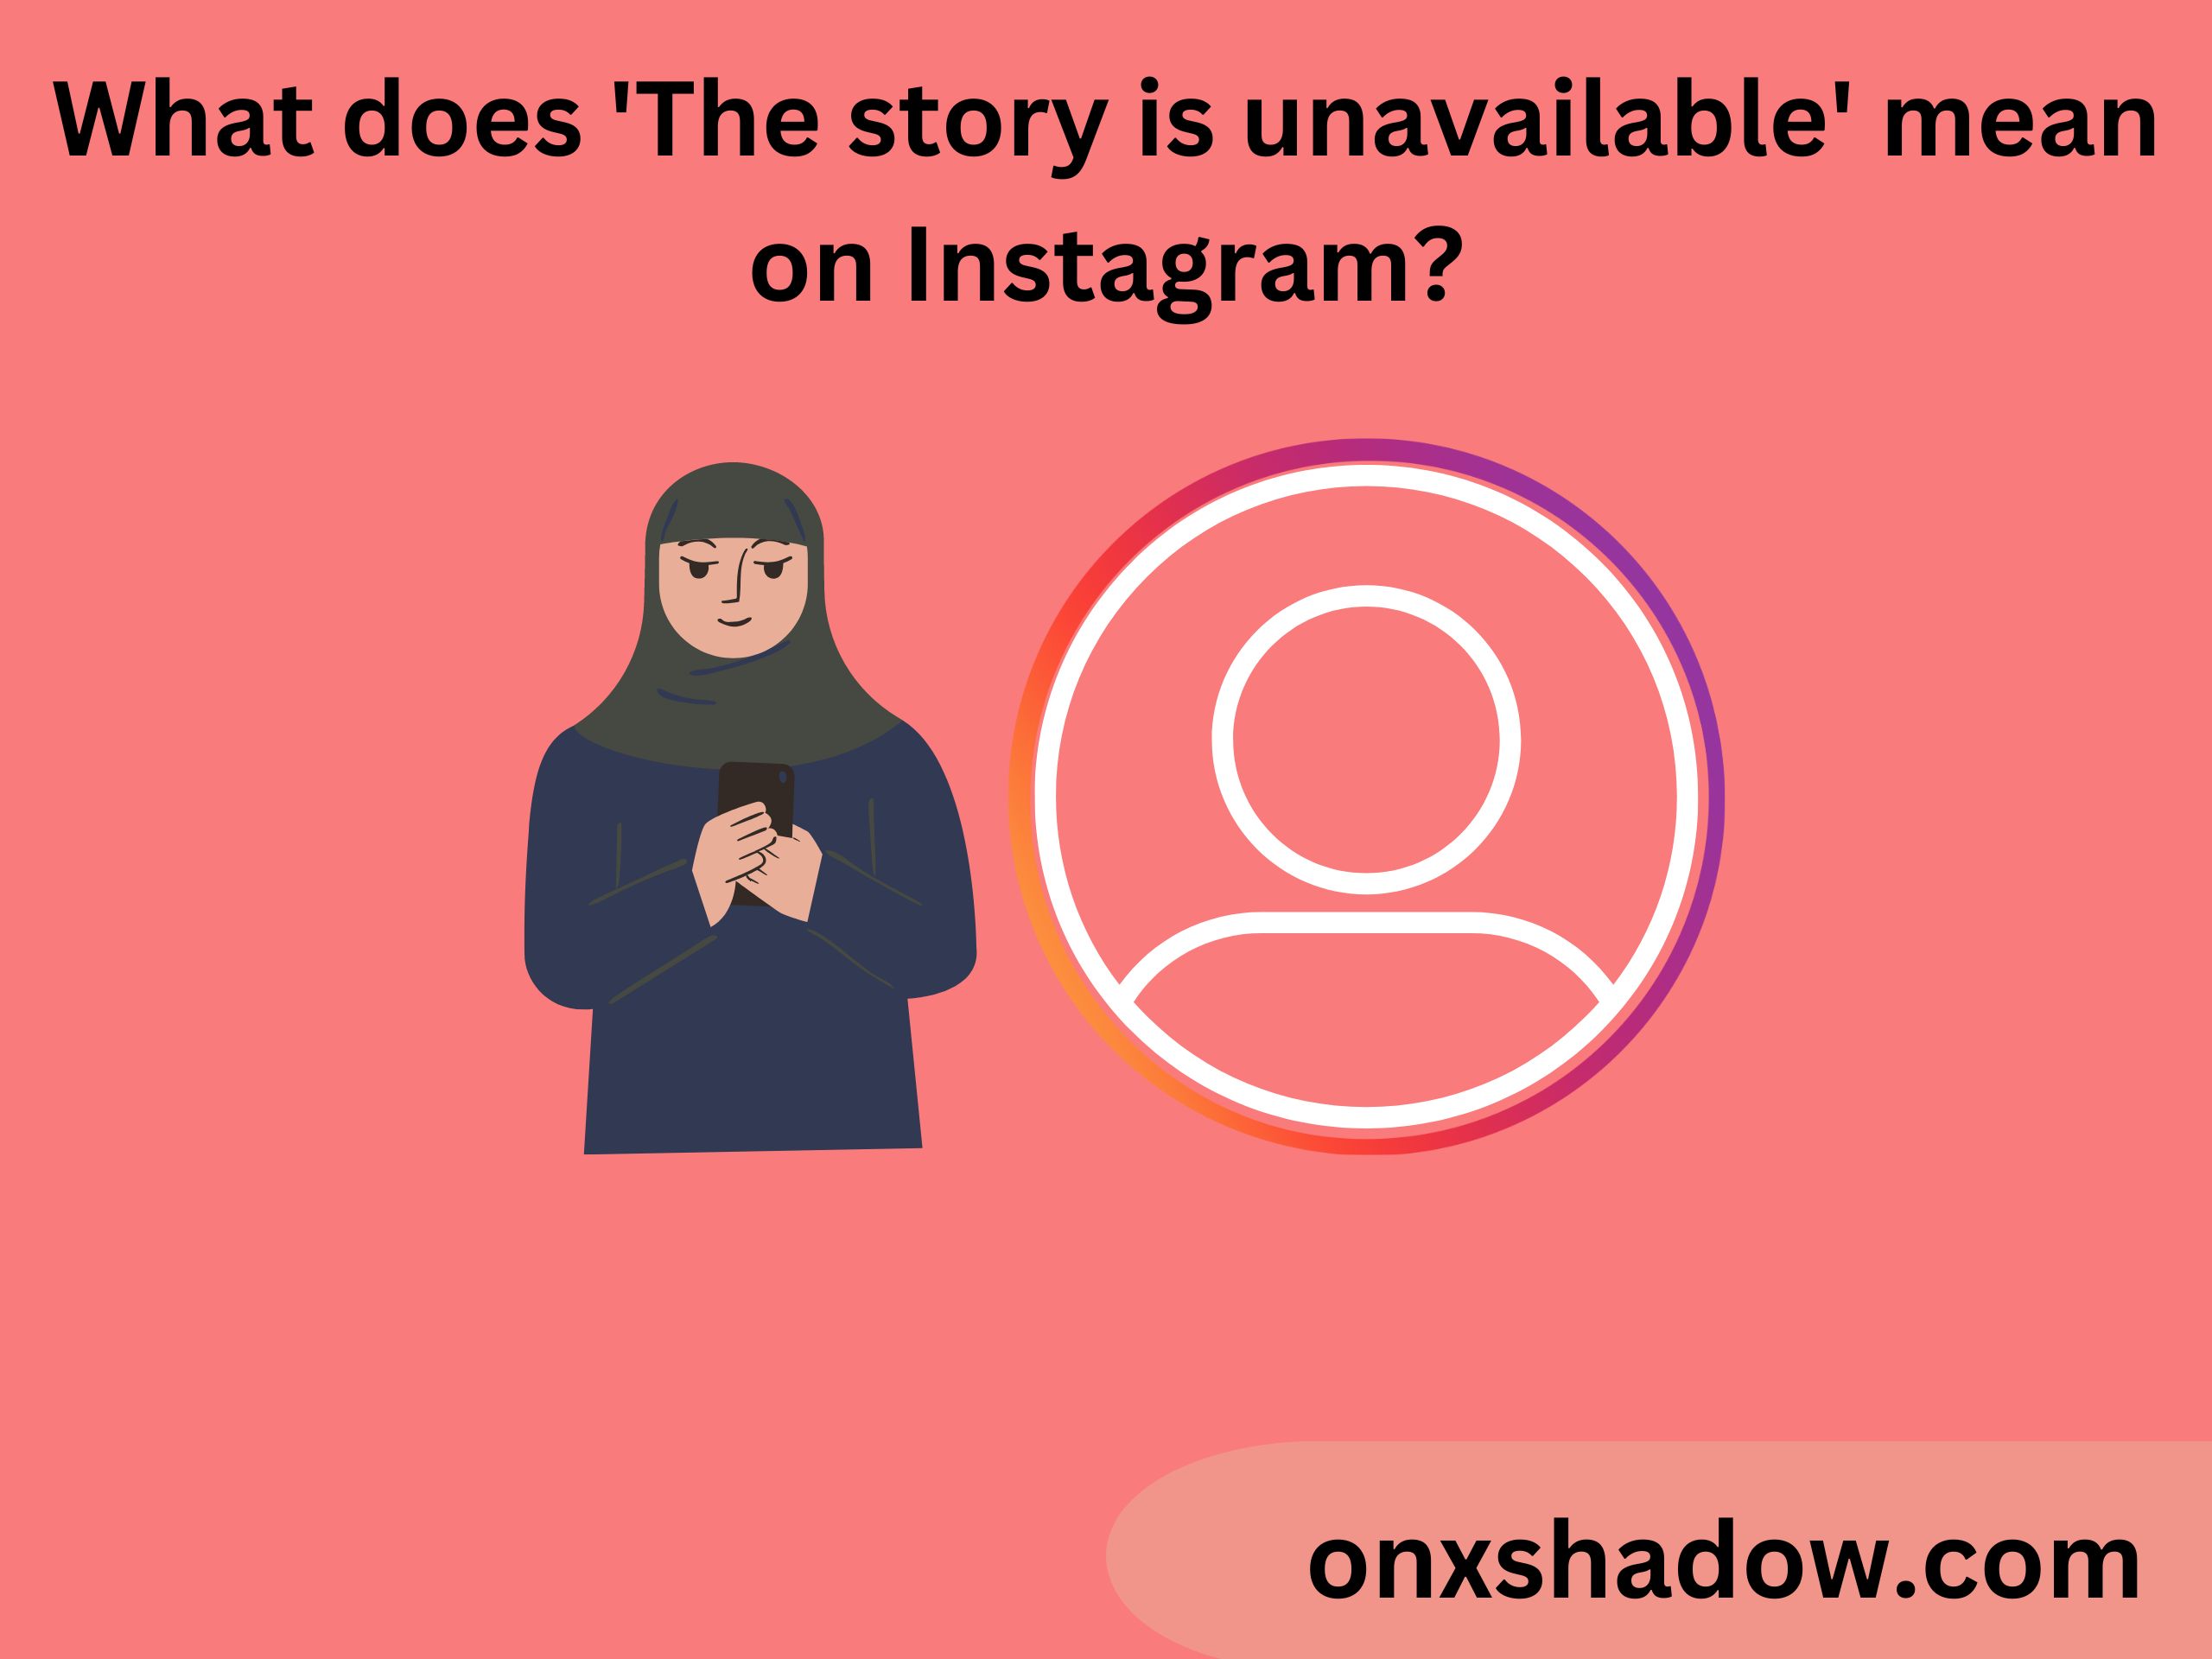 What does 'The story is unavailable' mean on Instagram?